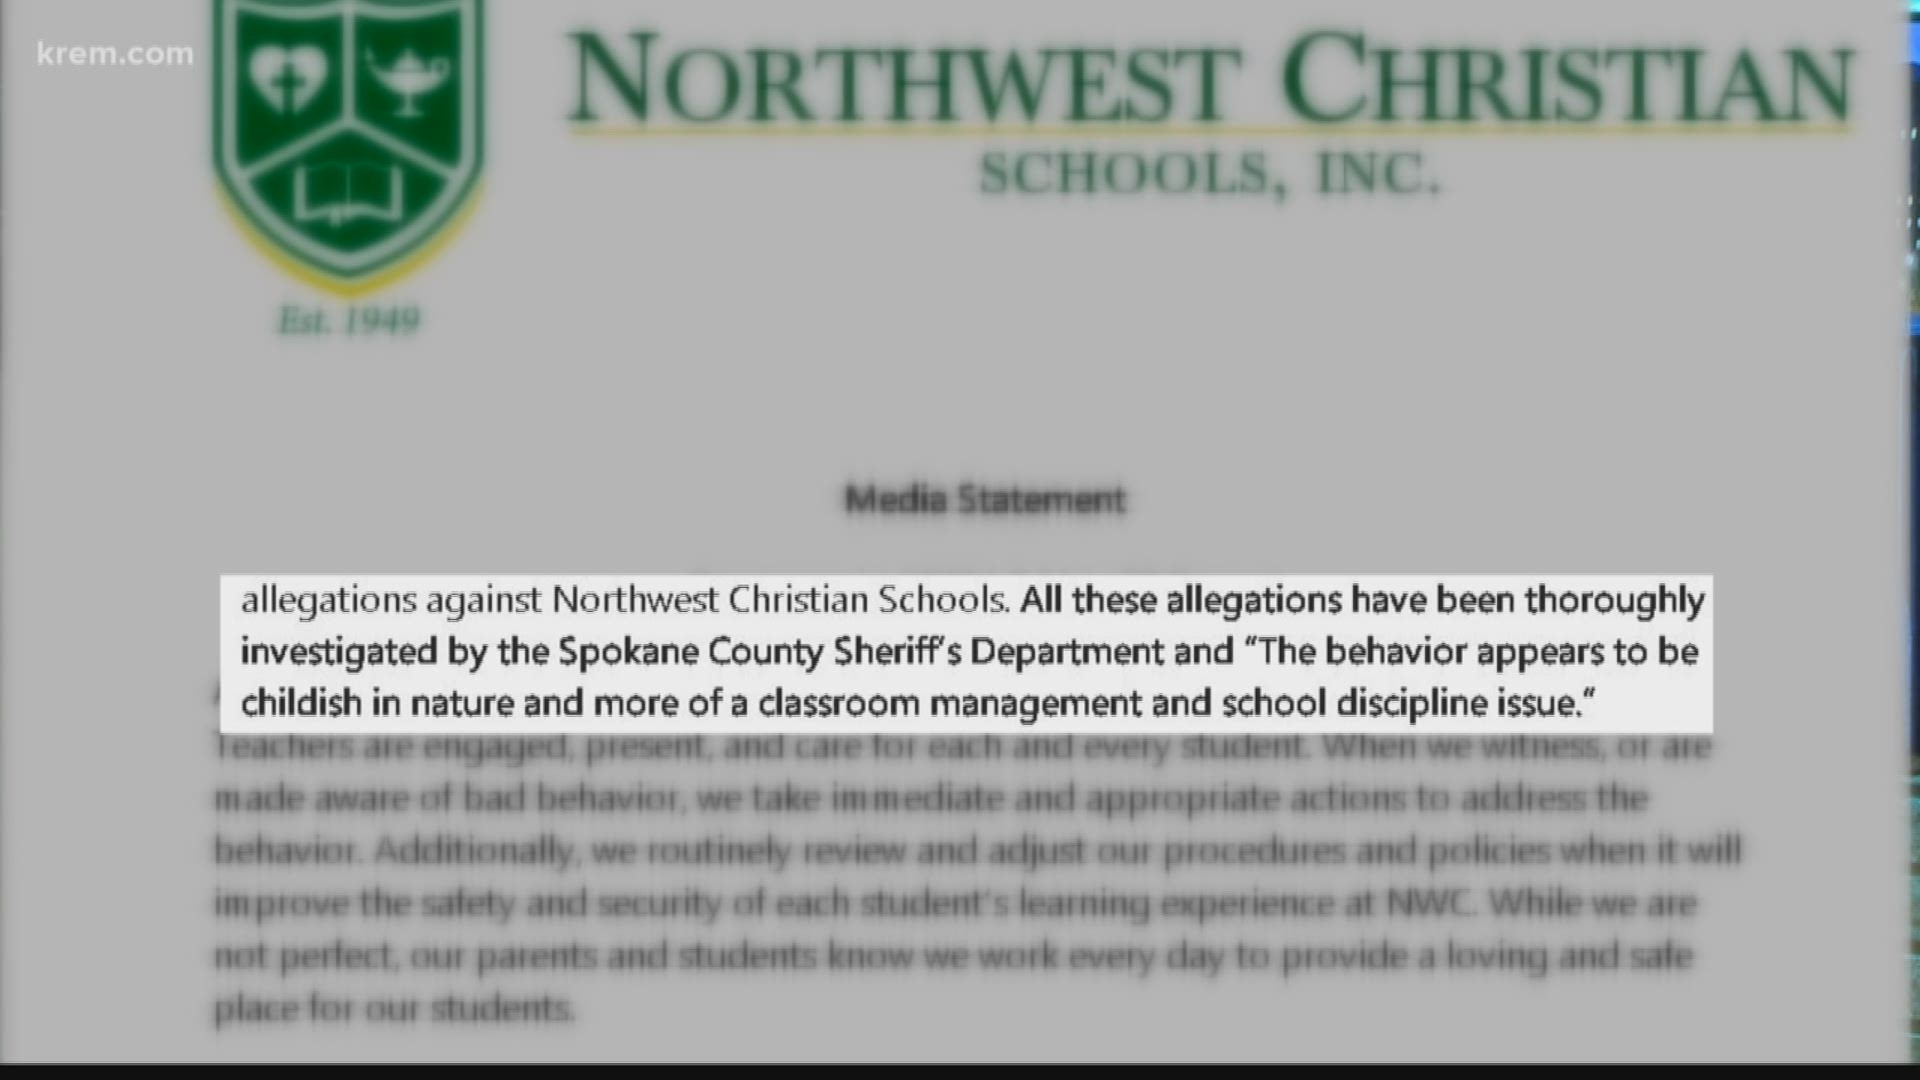 We received a few messages from parents at Northwest Christian School about a 2 On Your Investigation we aired on Tuesday. Some parents were frustrated we didn't include more information from the school's perspective about accusations of sexual harassment